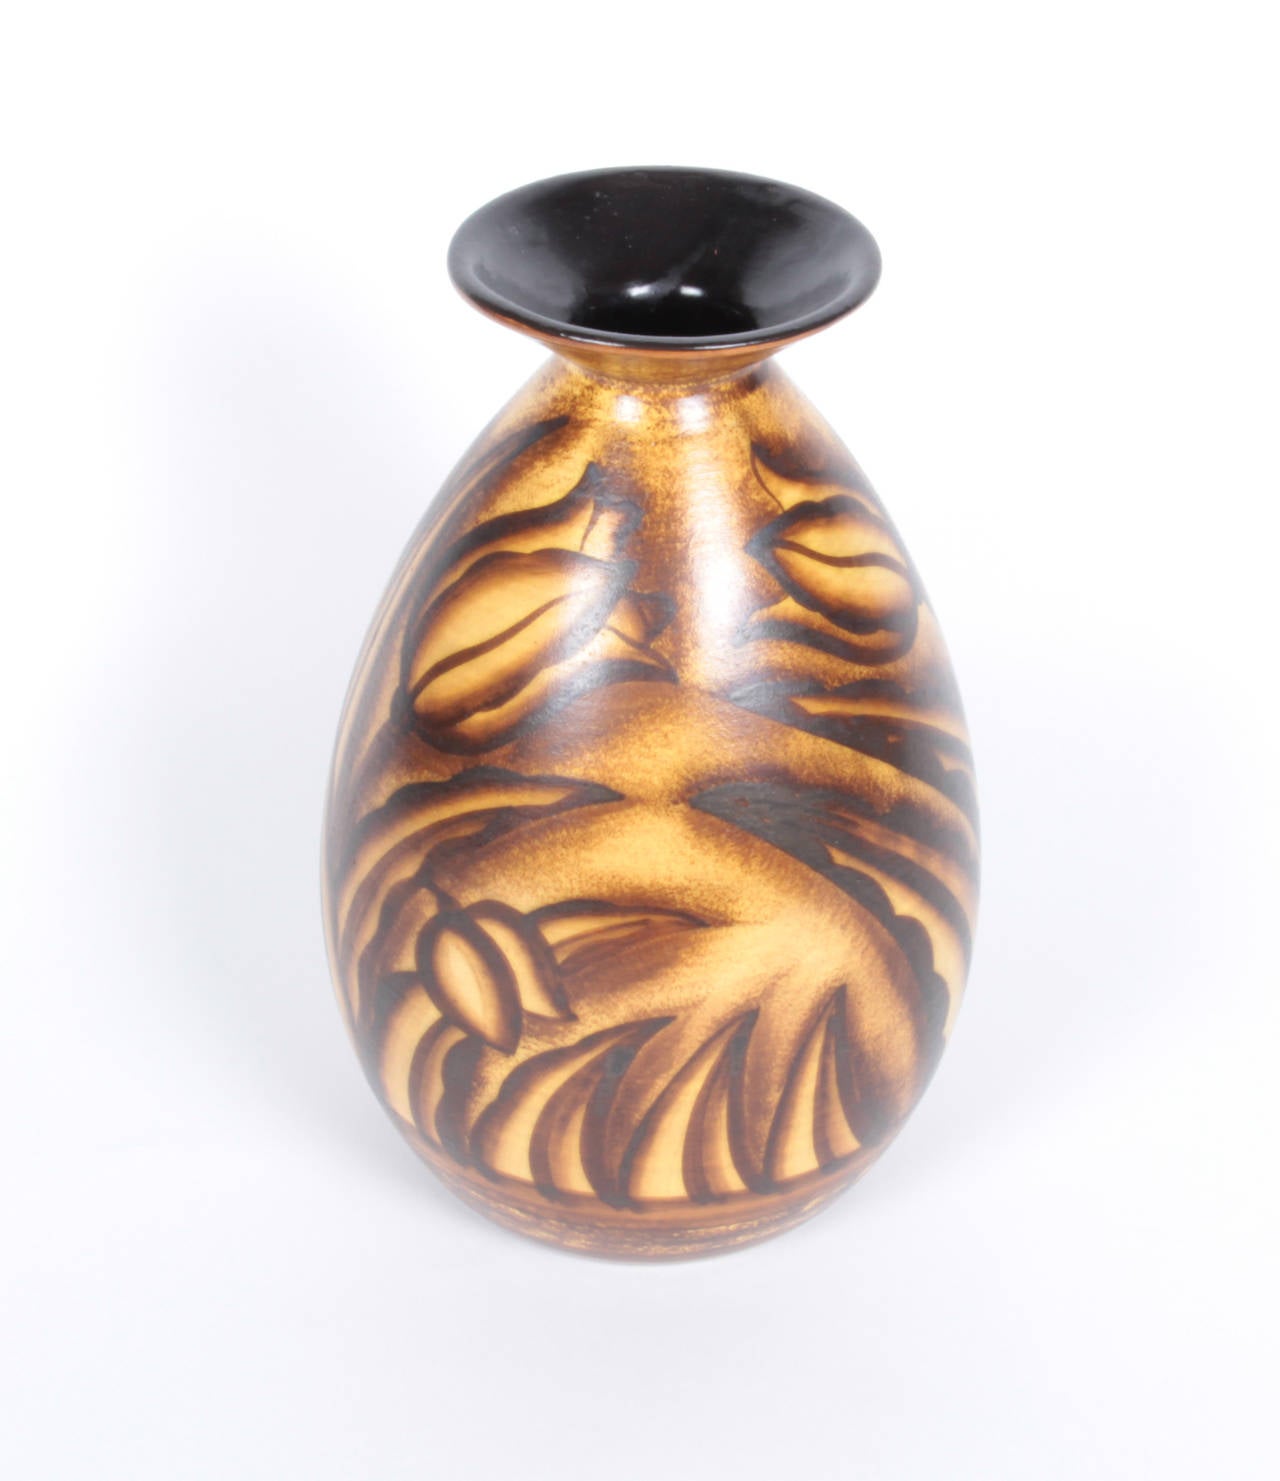 Charles Catteau for Boch Freres Keramis Belgium Glazed Pottery Vase, circa 1930 In Excellent Condition For Sale In New York, NY